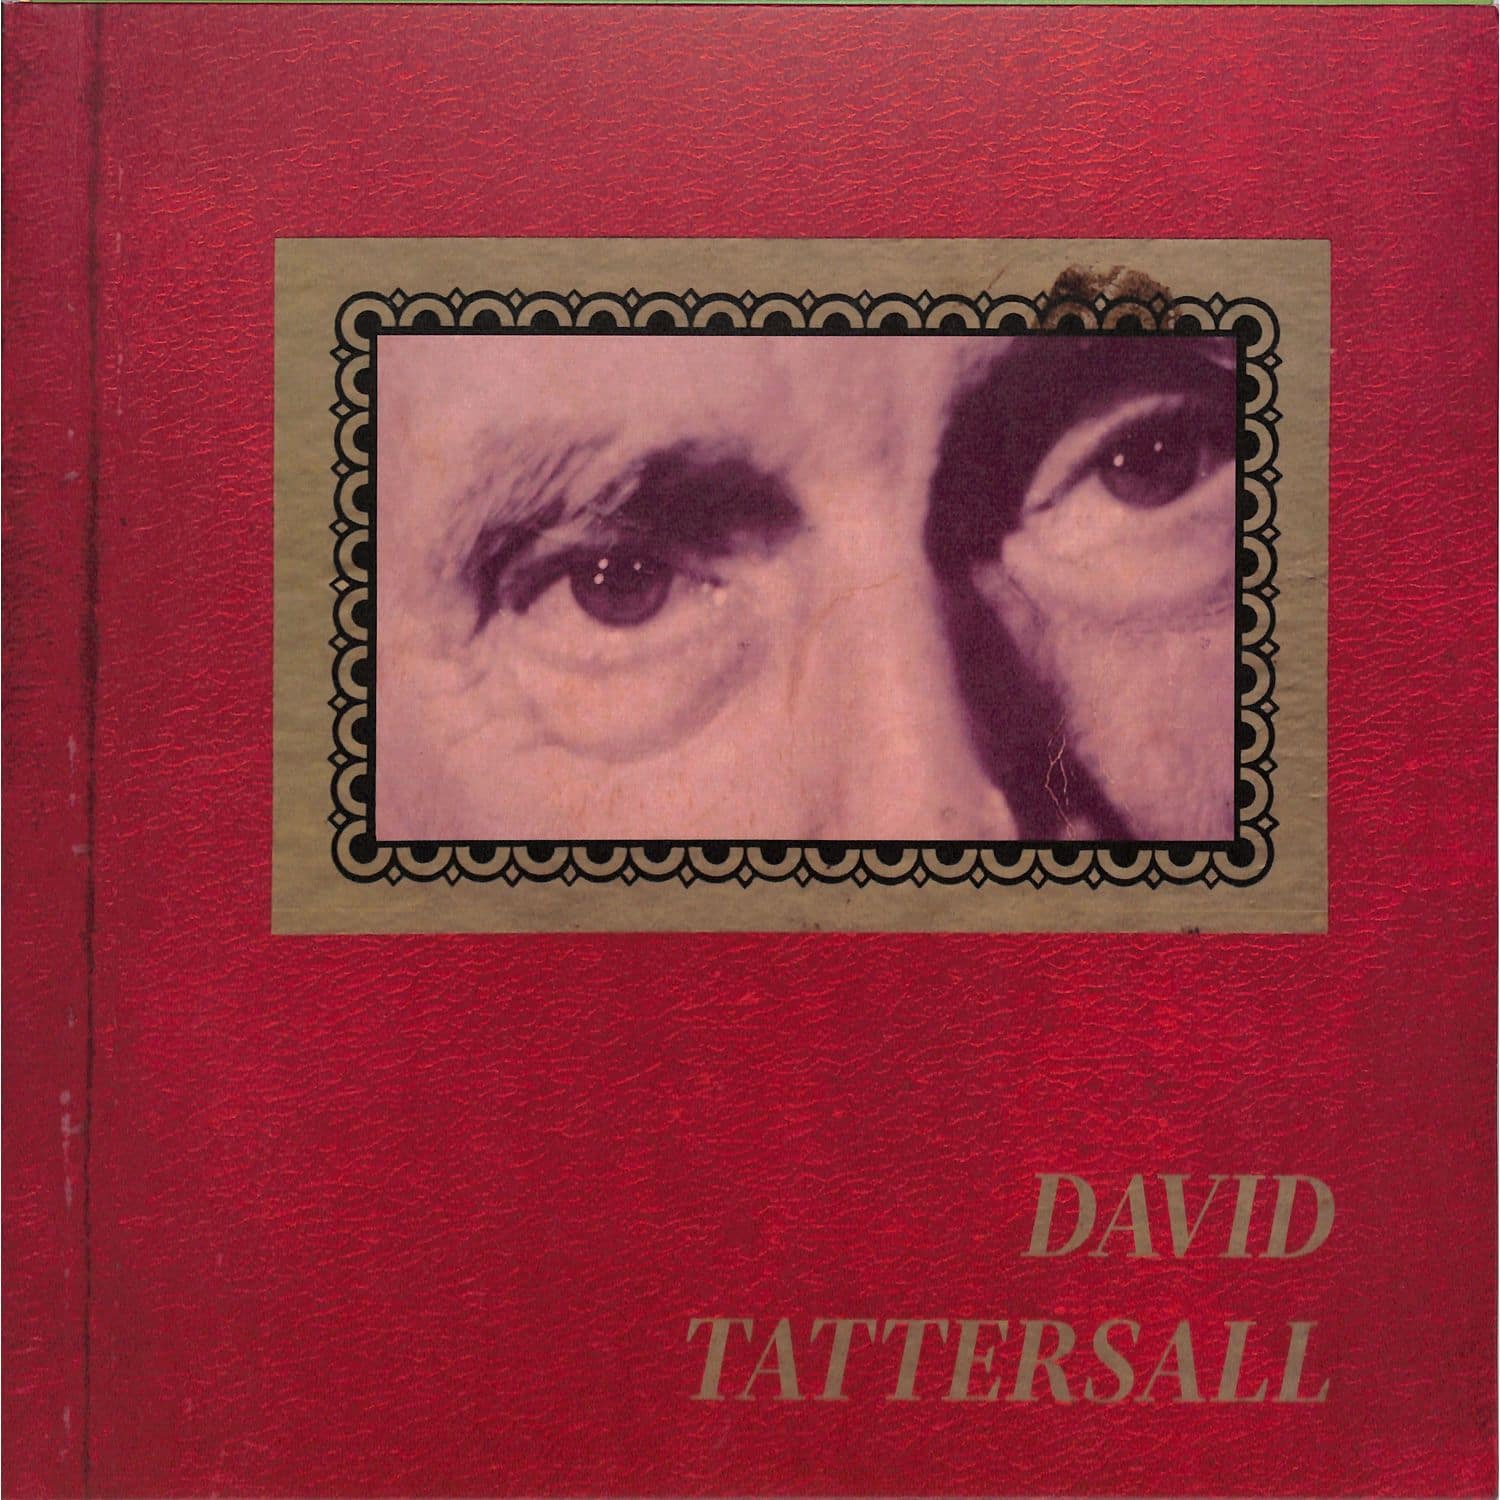 David Tattersall - ON THE SUNNY SIDE OF THE OCEAN 